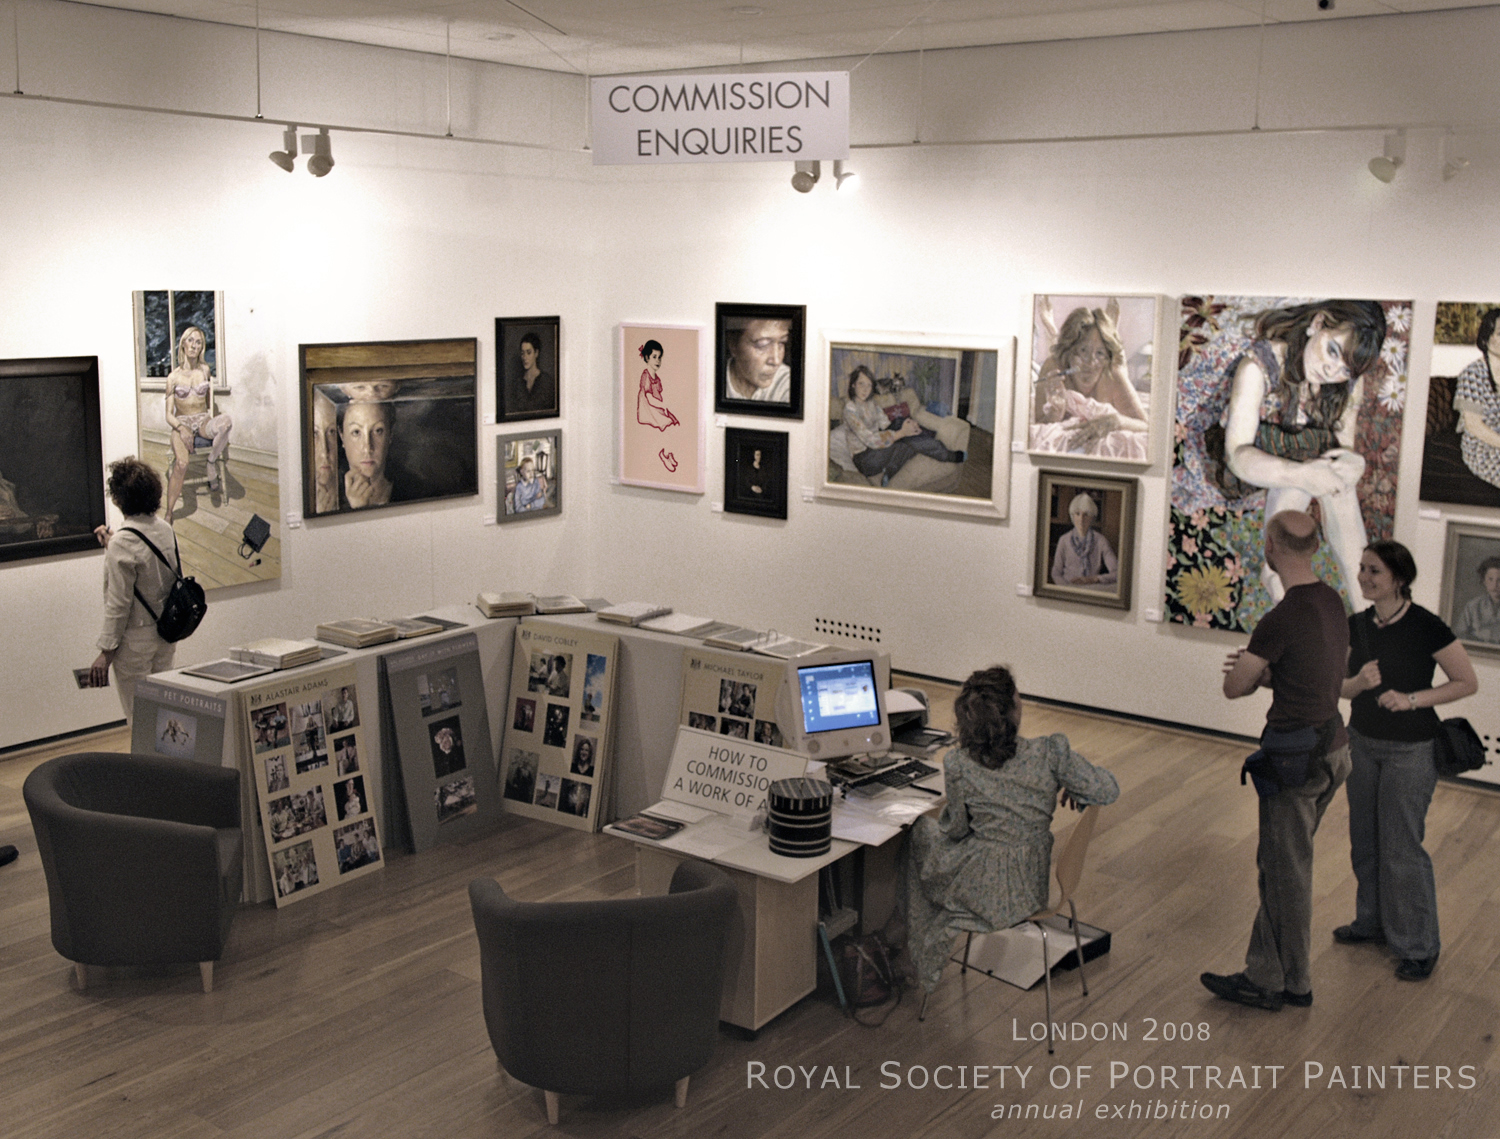 London 2008 - Royal Society of Portrait Painters